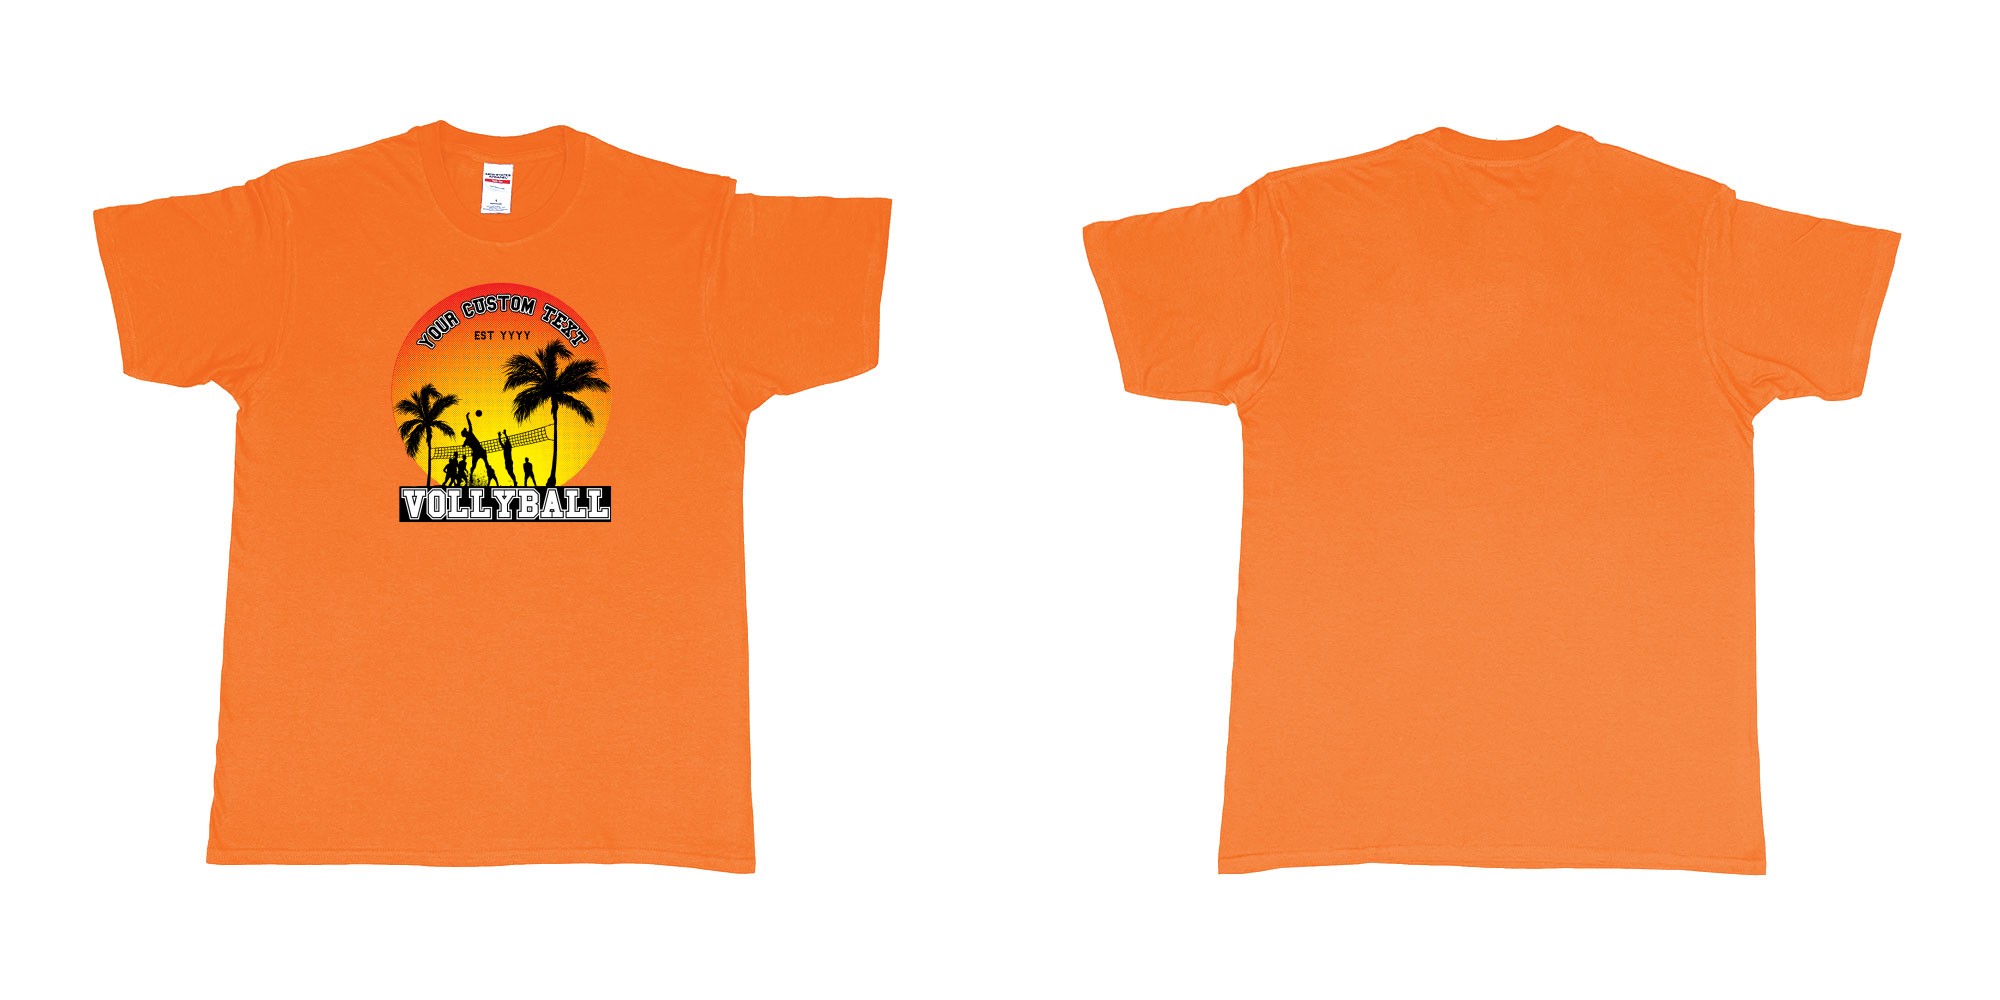 Custom tshirt design sunset volleyball t shirt with a sunset view and your custom print text and year in fabric color orange choice your own text made in Bali by The Pirate Way